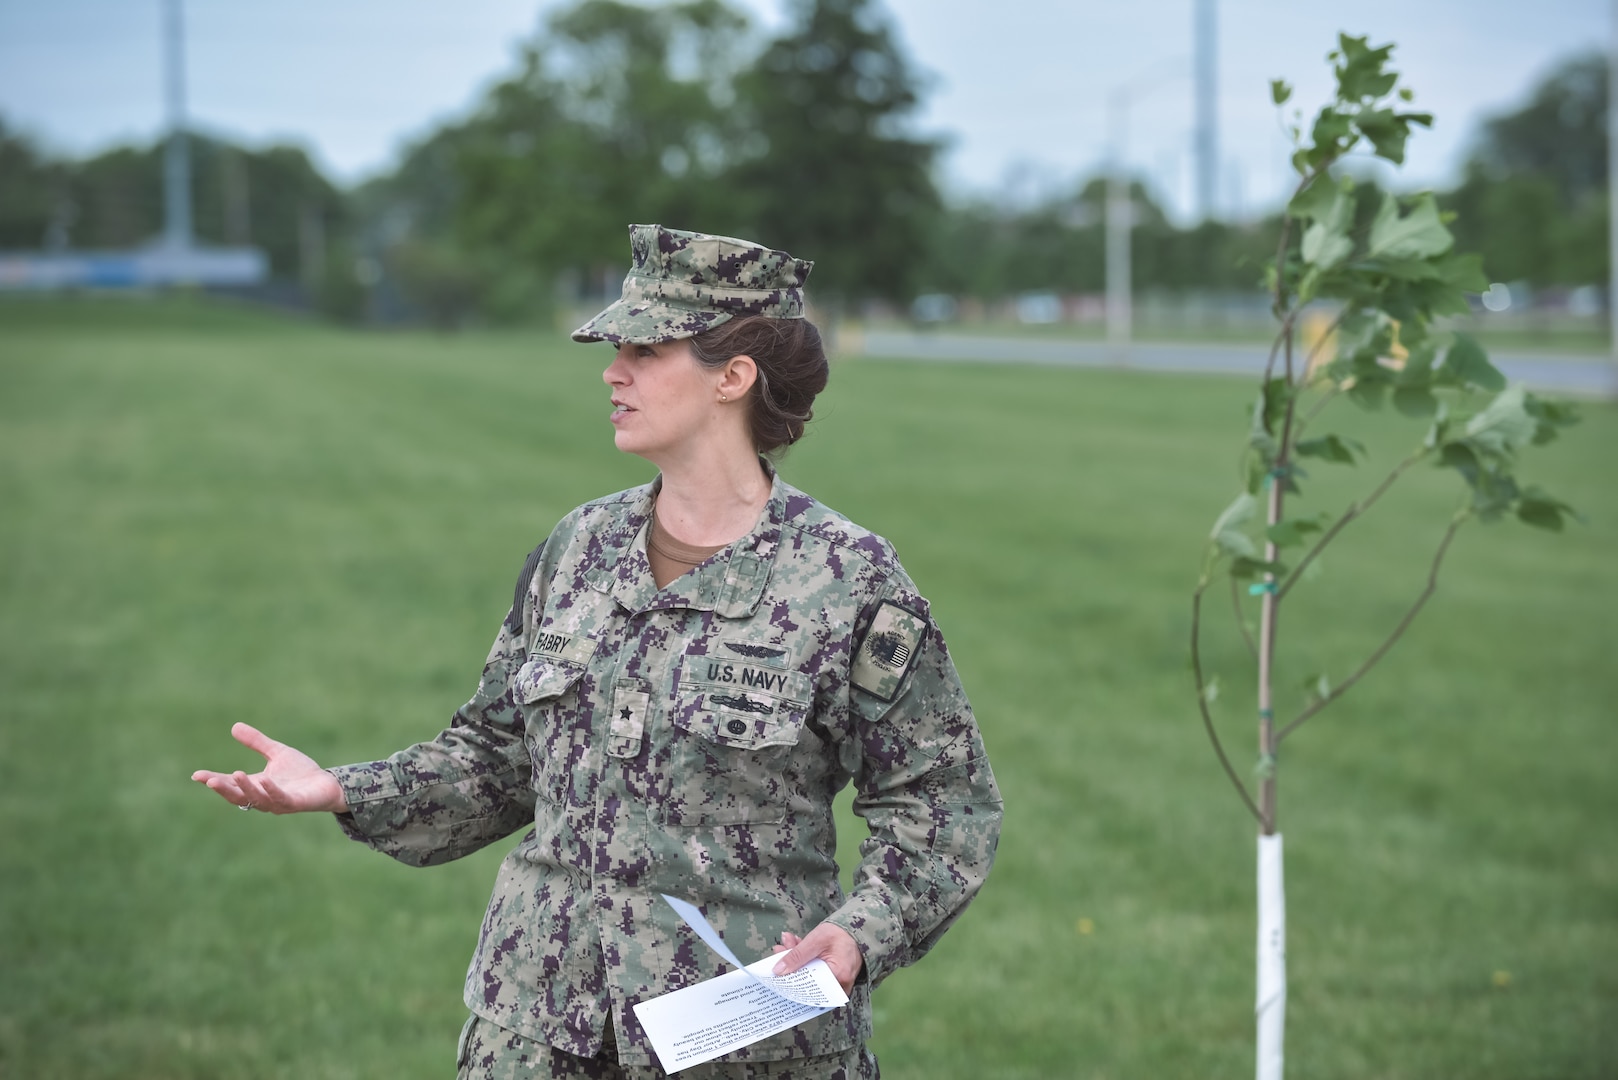 A woman in a military uniform speaks in front of a tulip tree.